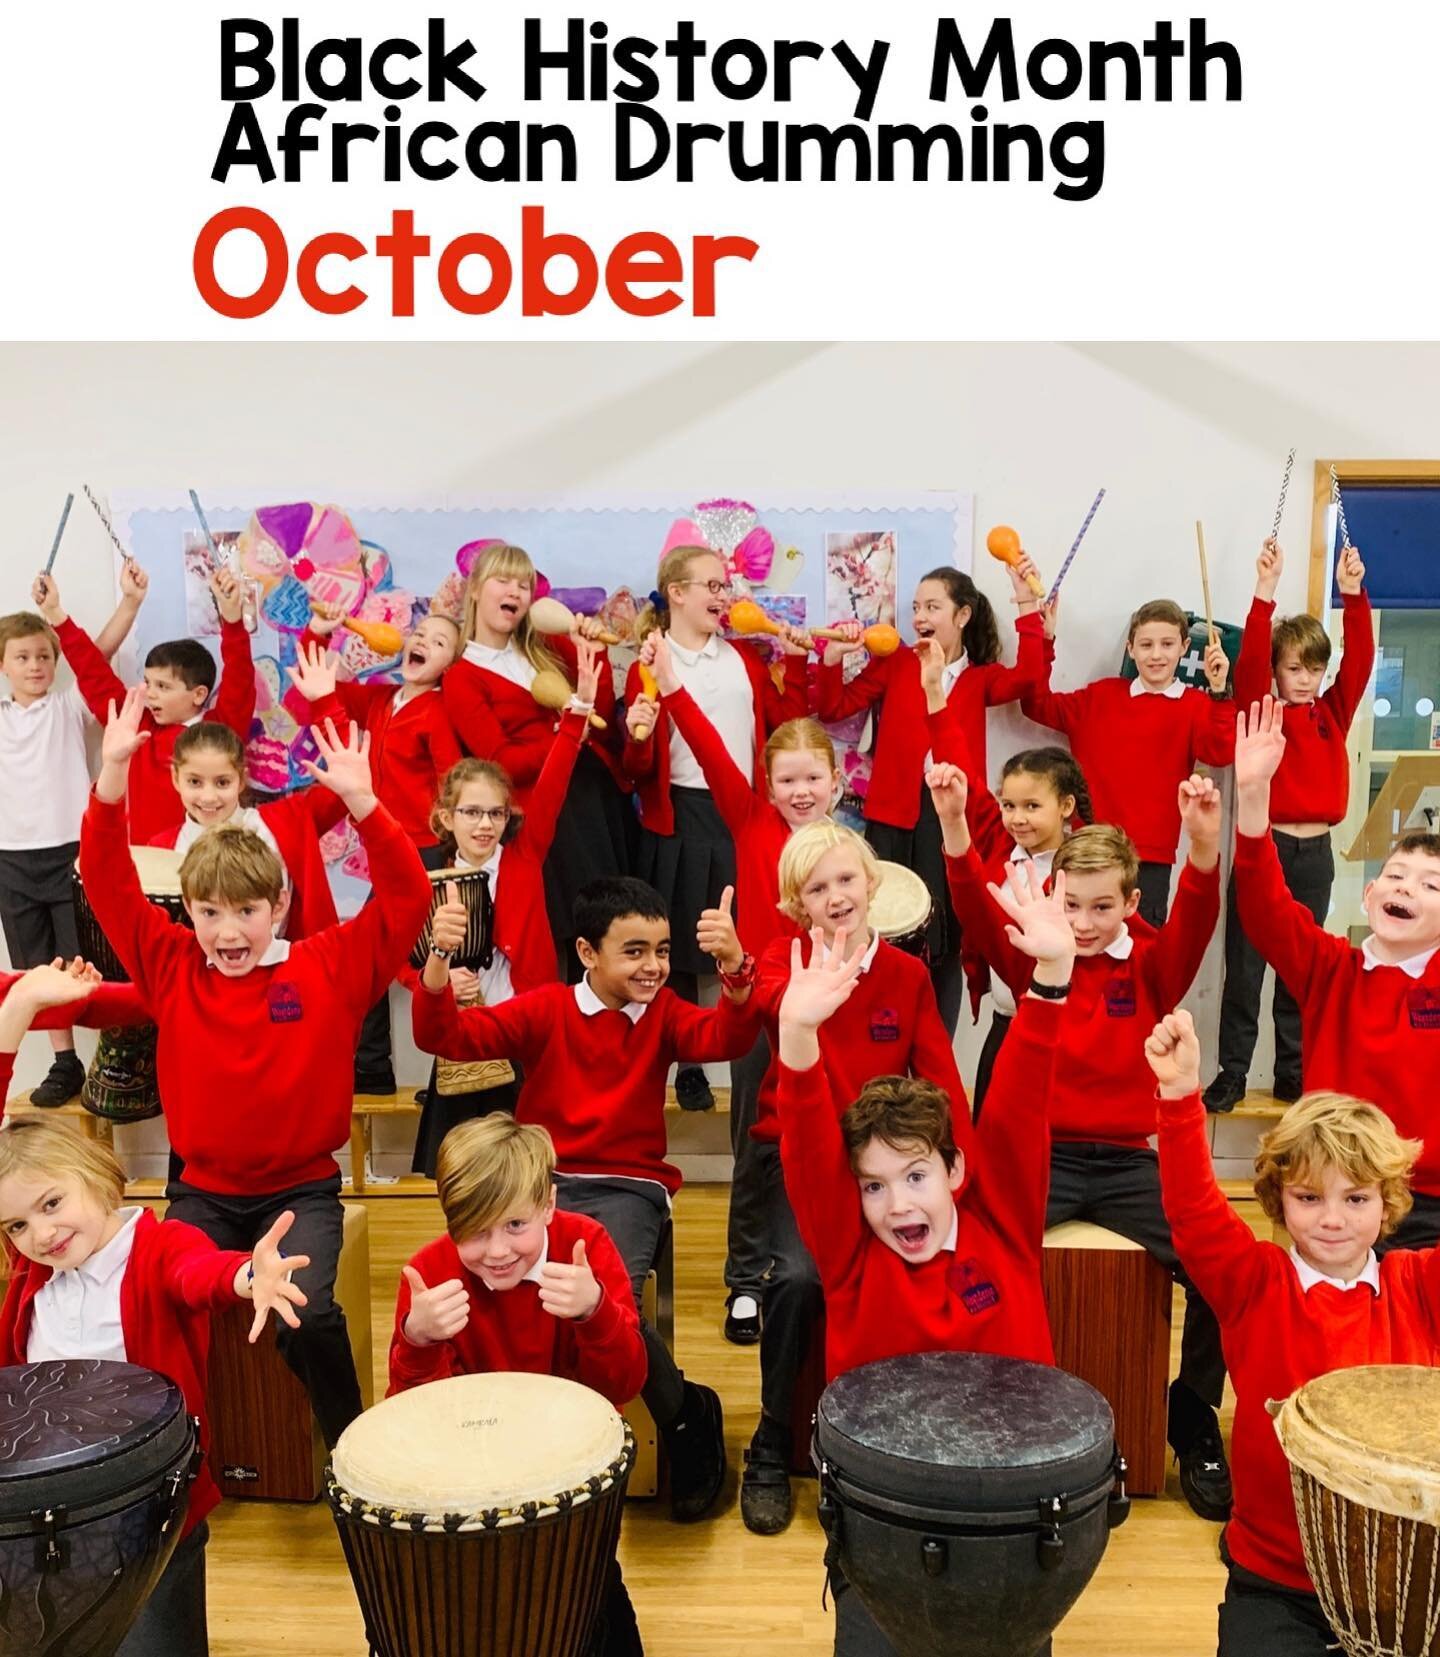 Do you have a connection with a Primary School in the UK? I&rsquo;m now taking bookings for African drumming workshops to celebrate Black History Month this October. You can check my availability via the link in my bio. #blackhistorymonth #africandru